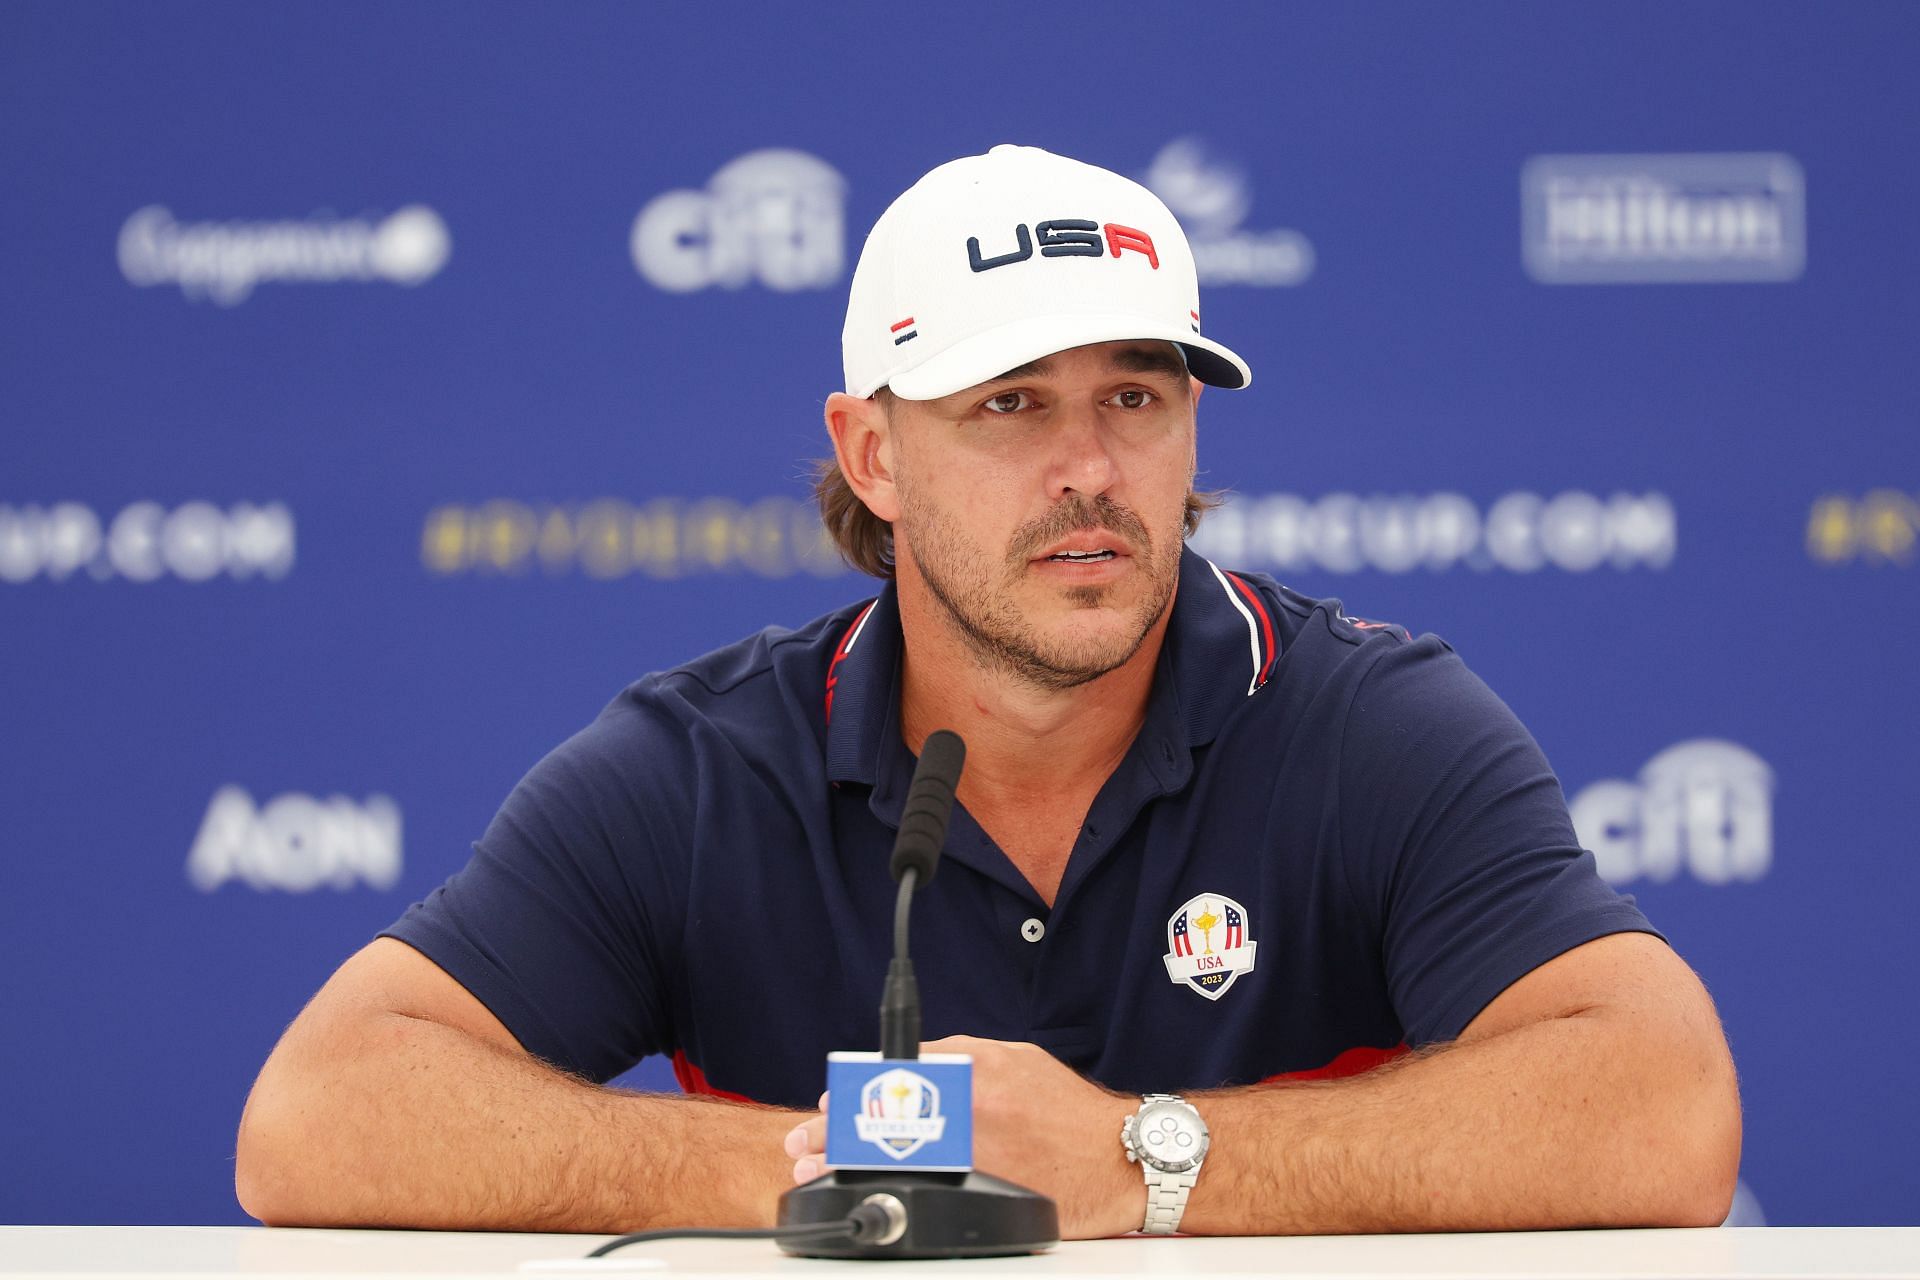 Brooks Koepka feels a part of the team